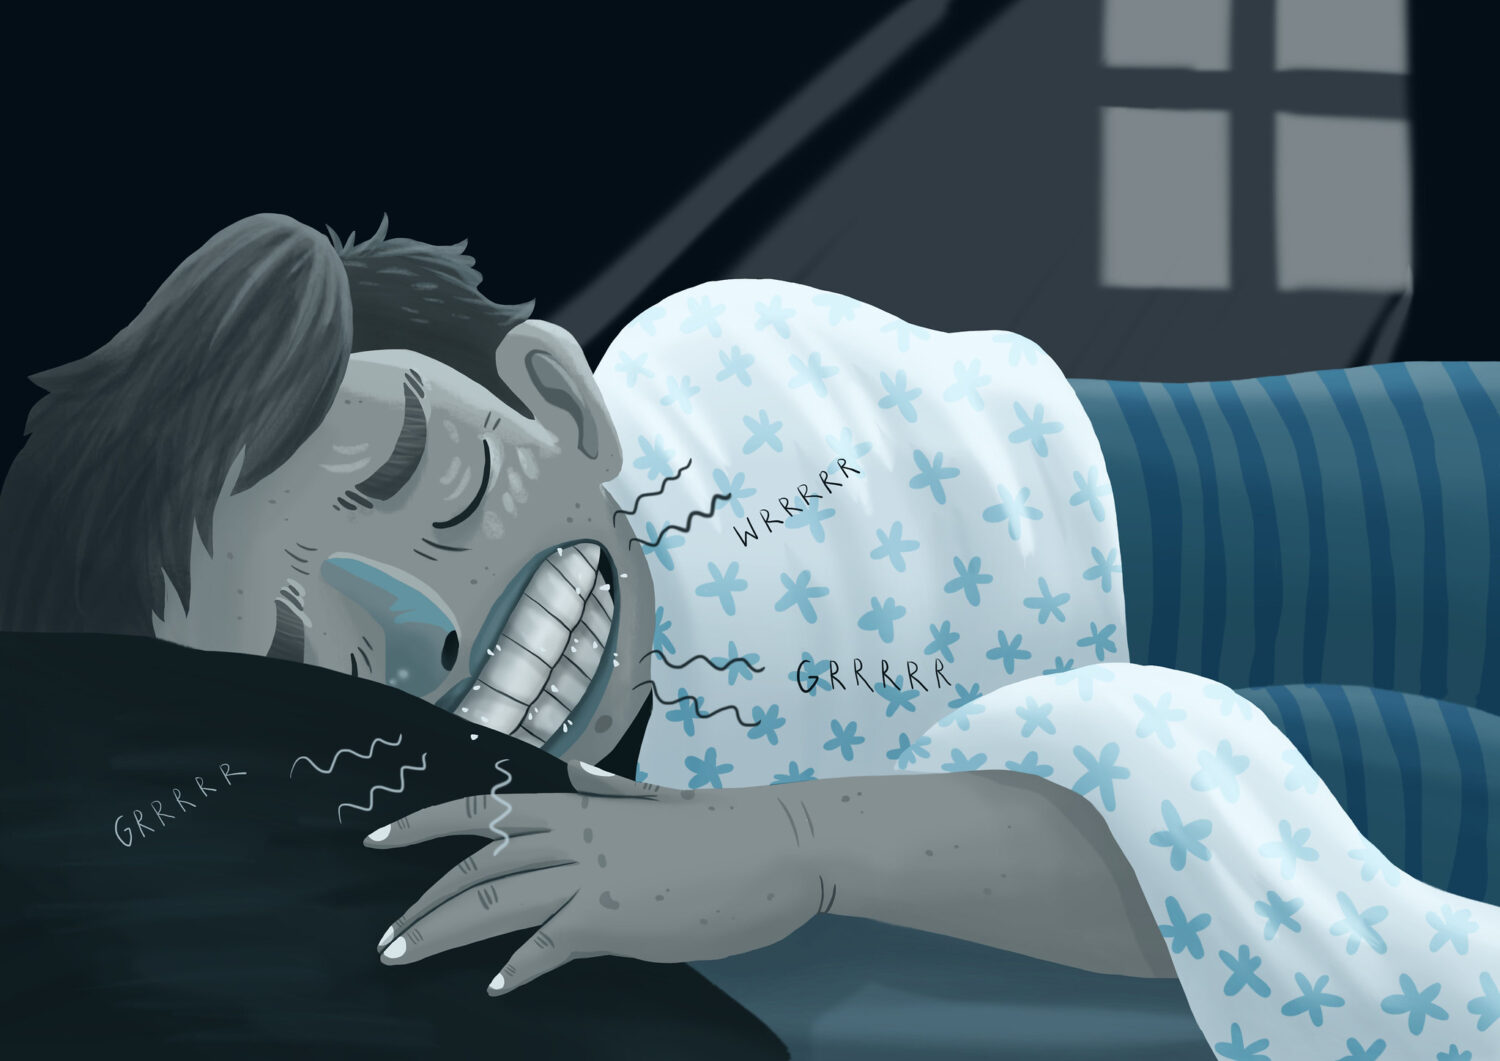 Illustration of a man grinding and clenching his teeth as he sleeps